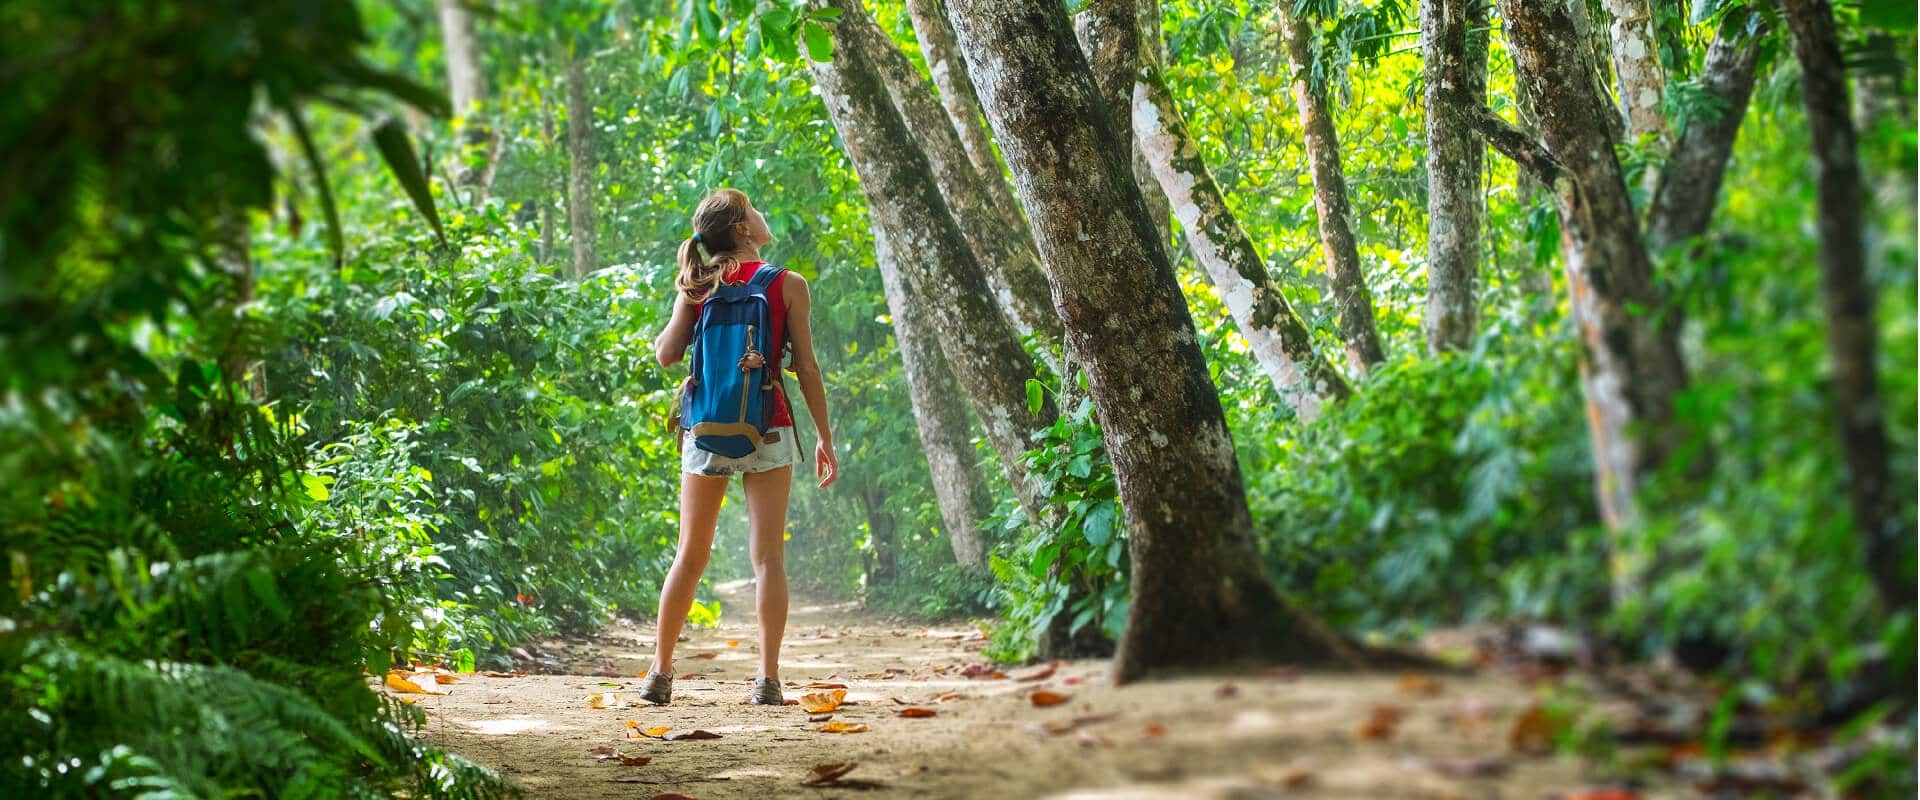 school packages to costa rica student travel